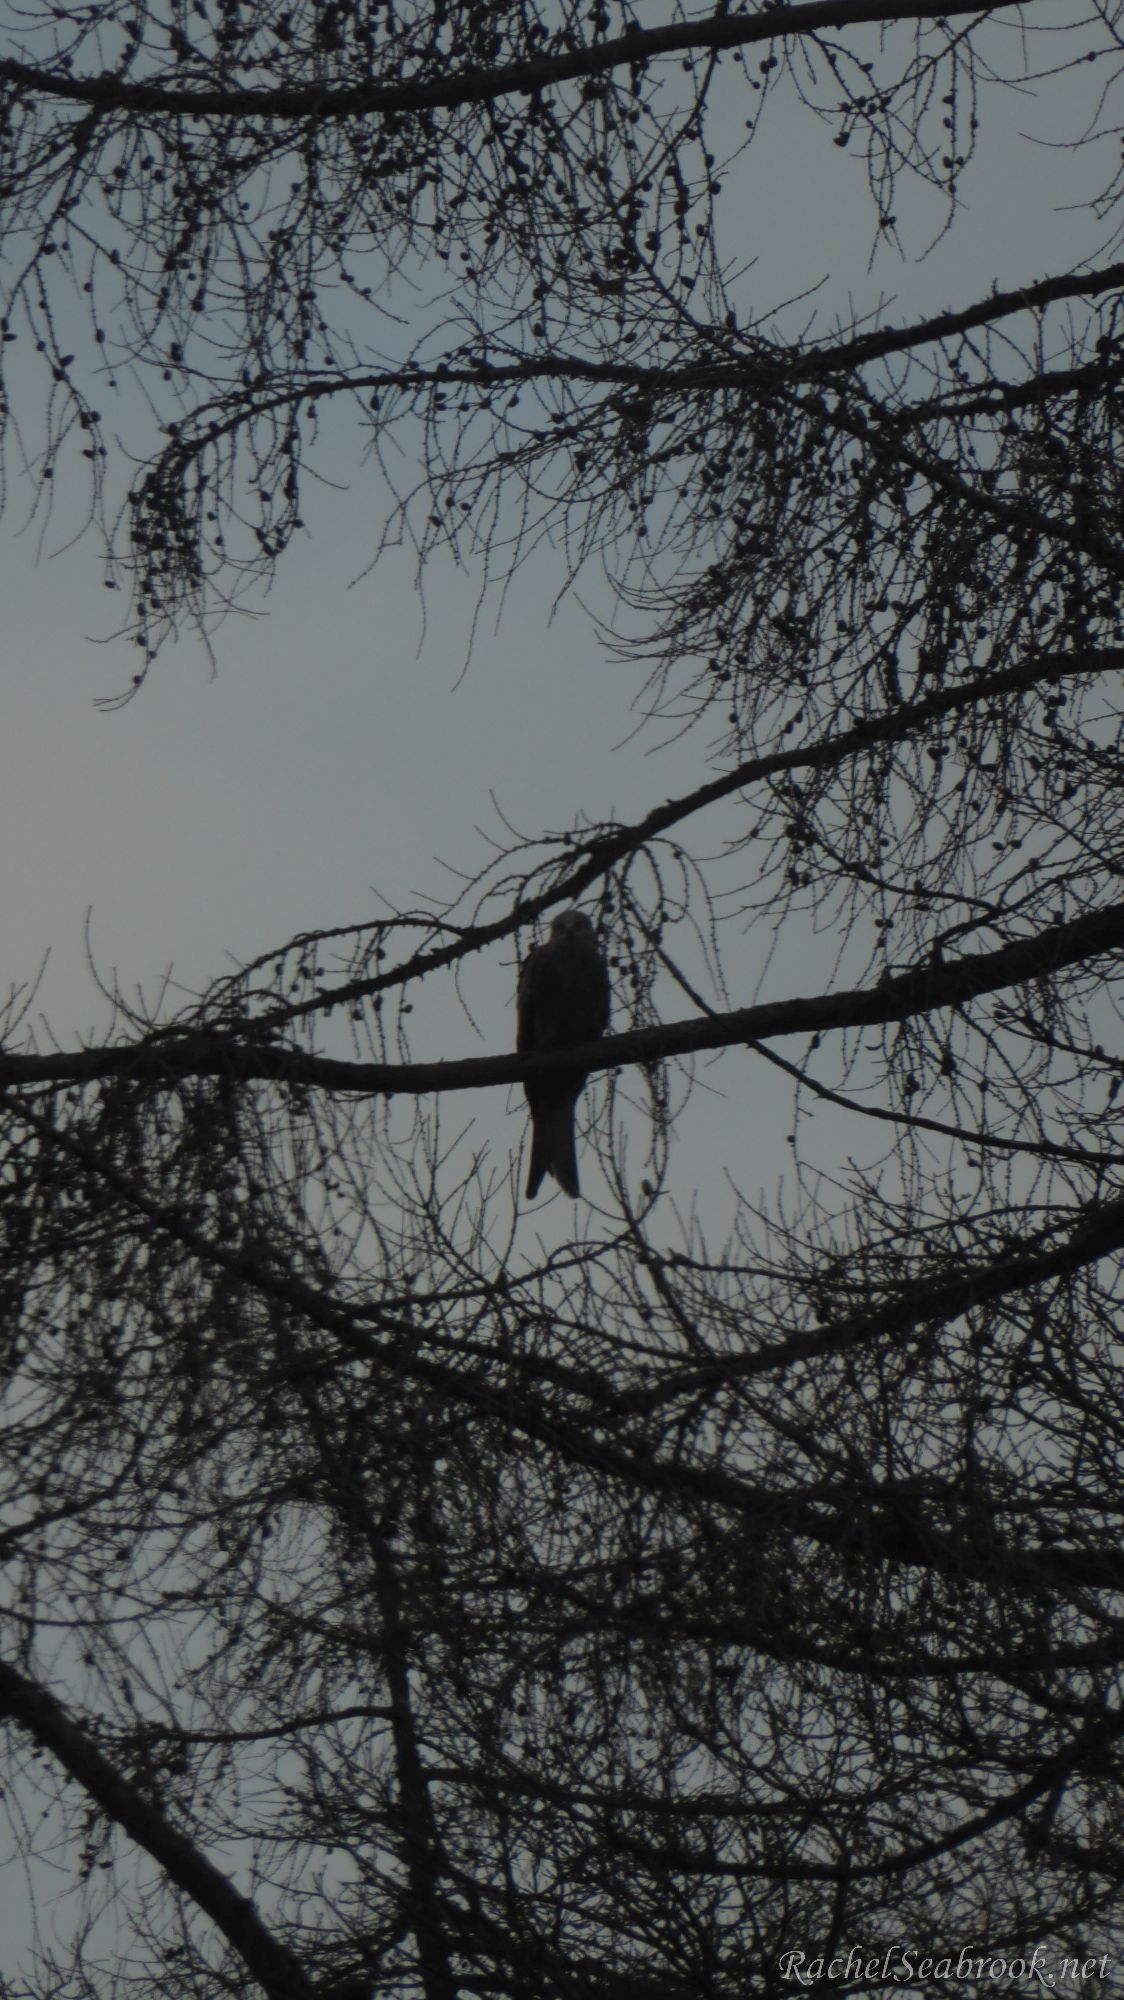 Red kite in a tree